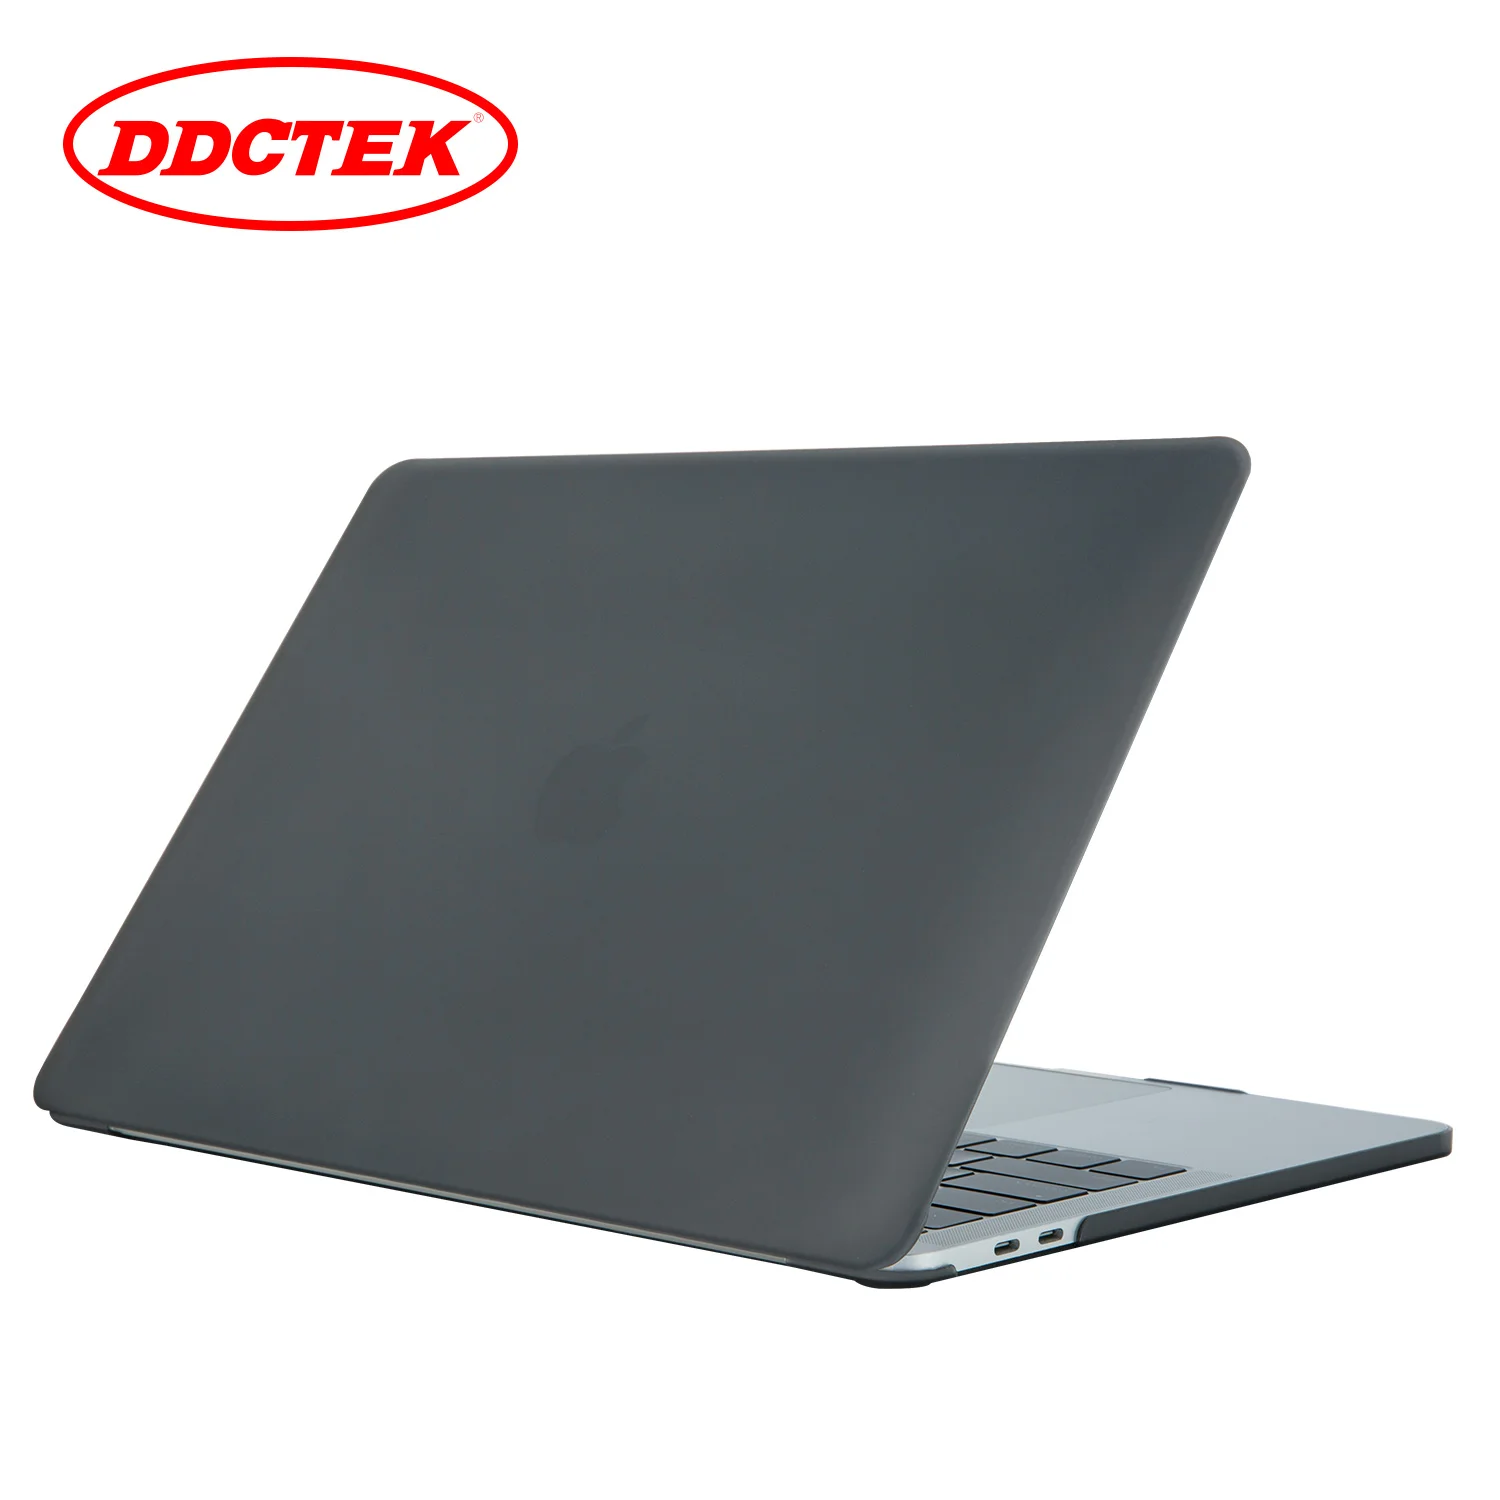 

PC Case High Quality Matte Hard Shell Laptop Slim 13 Inch A1706 A1708 for Macbook Pro Waterproof Unisex Freight 2pcs DDC CN;GUA